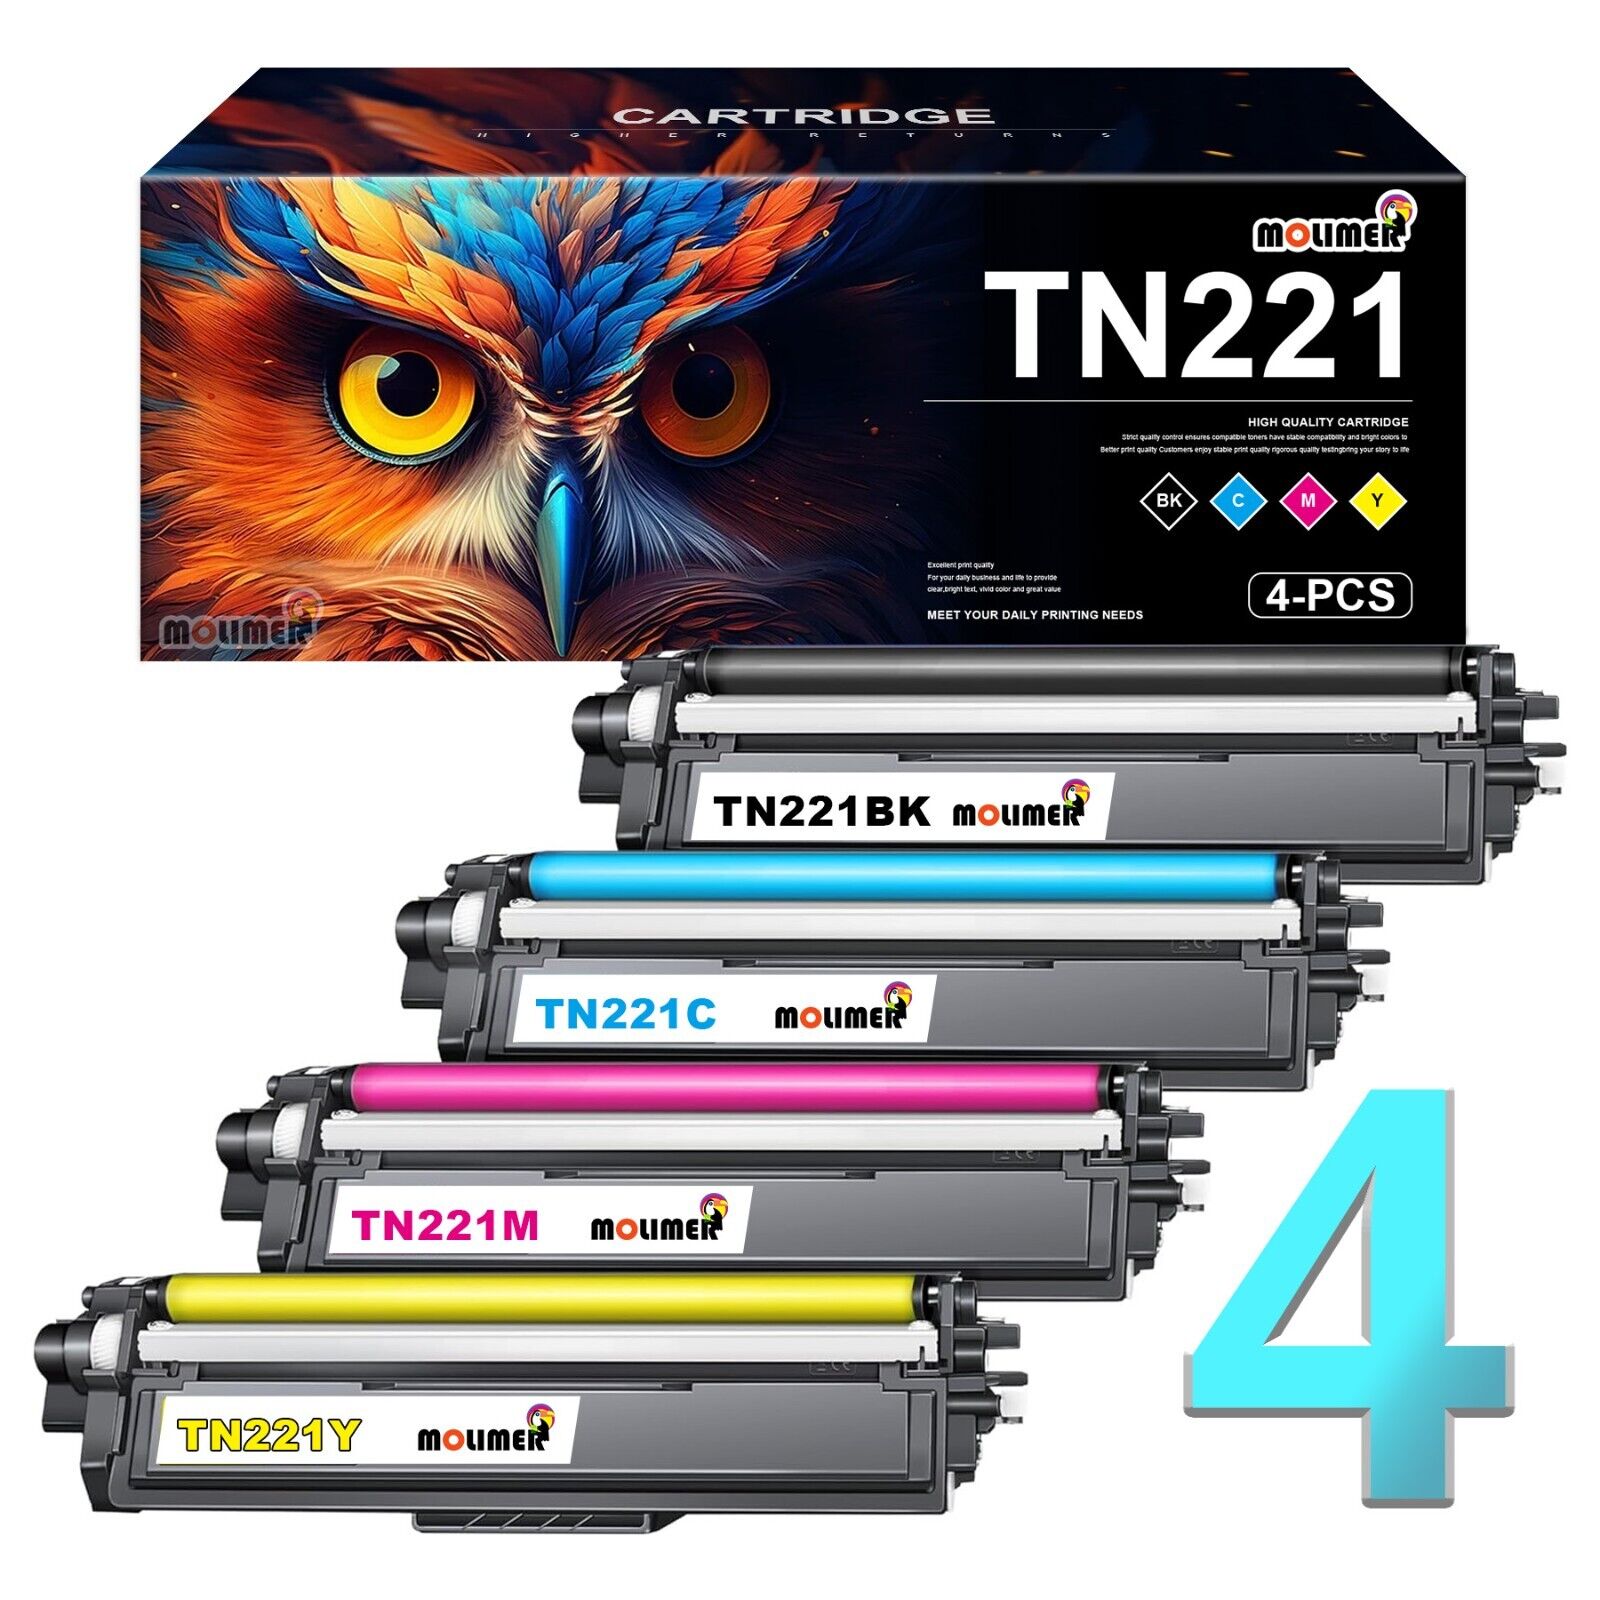 TN221 Toner Cartridge Replacement for Brother HL-3140CW HL-3170CDW 3180CDW 4 PK